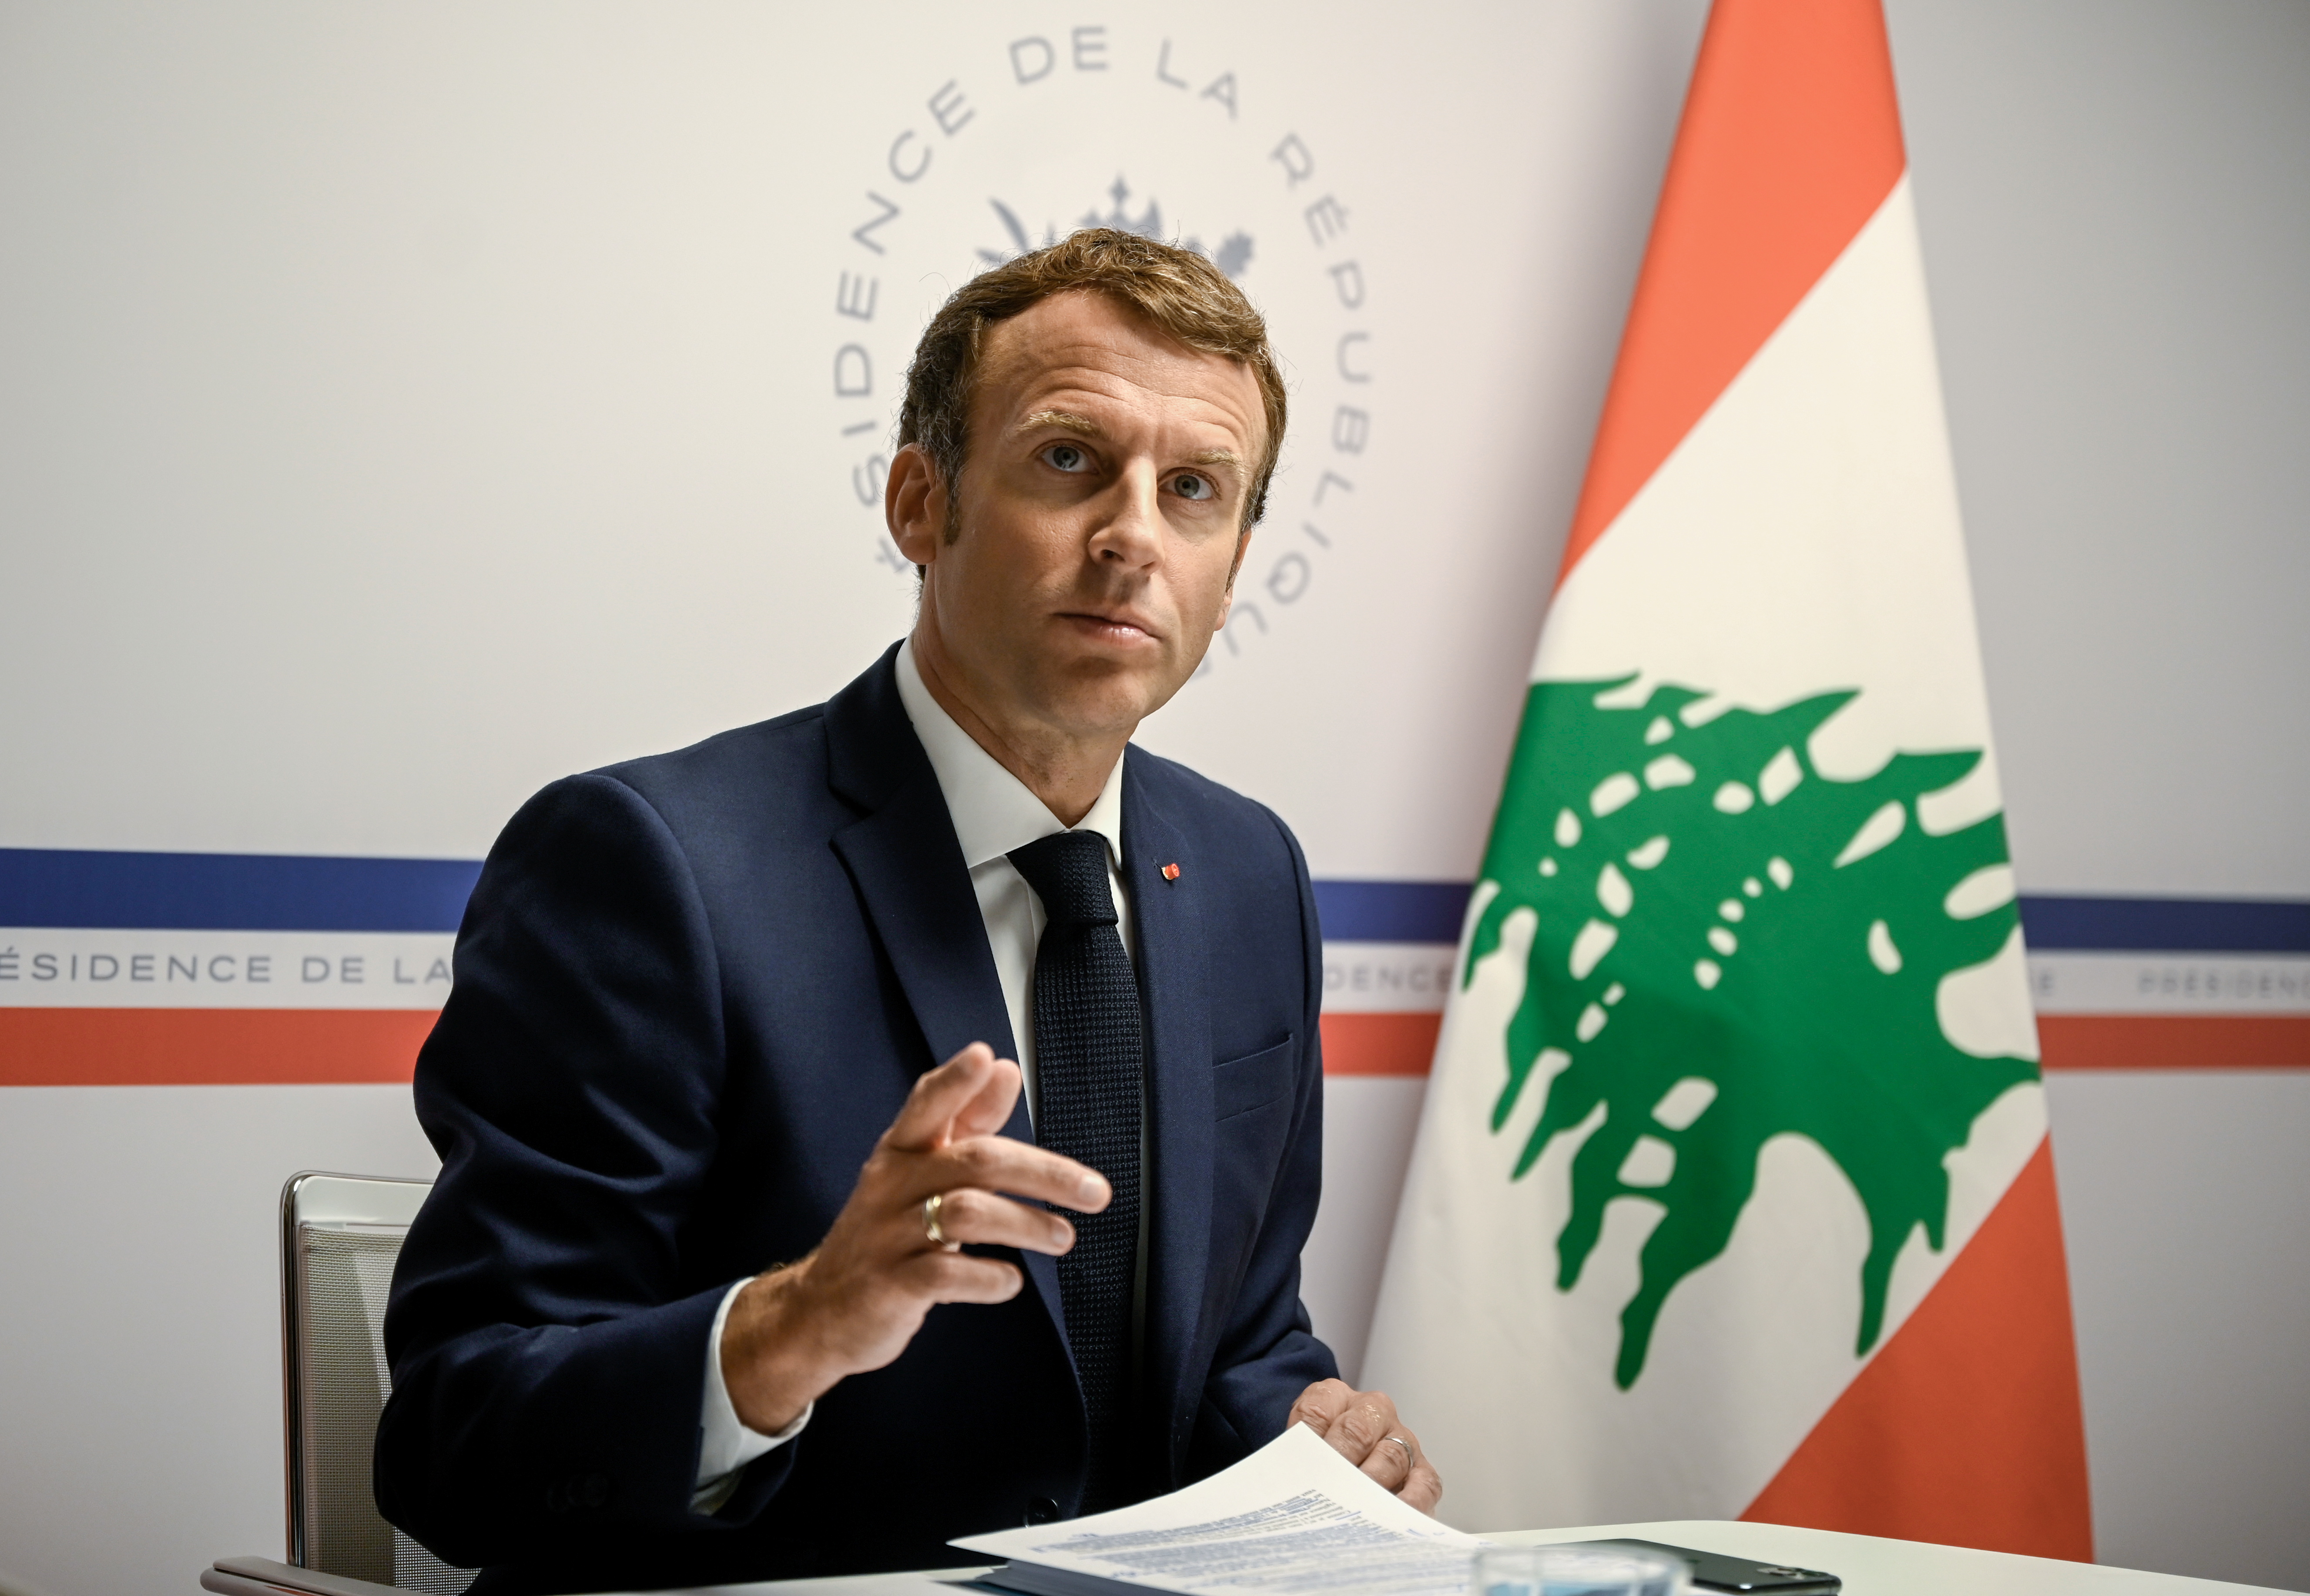 France's President Emmanuel Macron attends the Lebanon donors' conference at Fort de Bregancon, in Bormes-Les-Mimosas